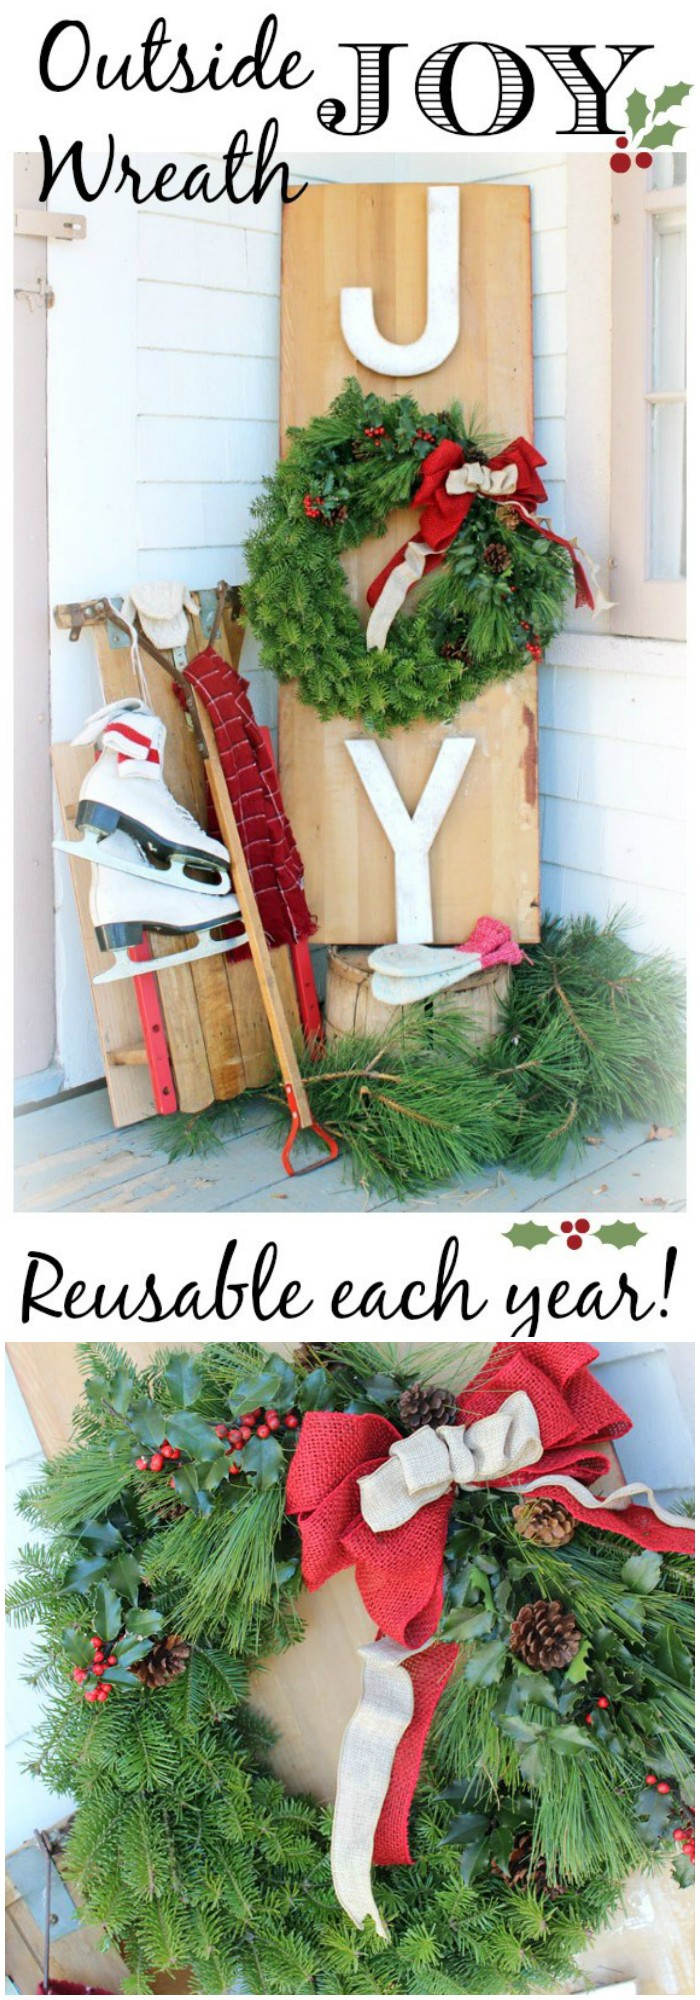 Easy Outdoor Christmas Decorations
 21 Cheap DIY Outdoor Christmas Decorations • DIY Home Decor